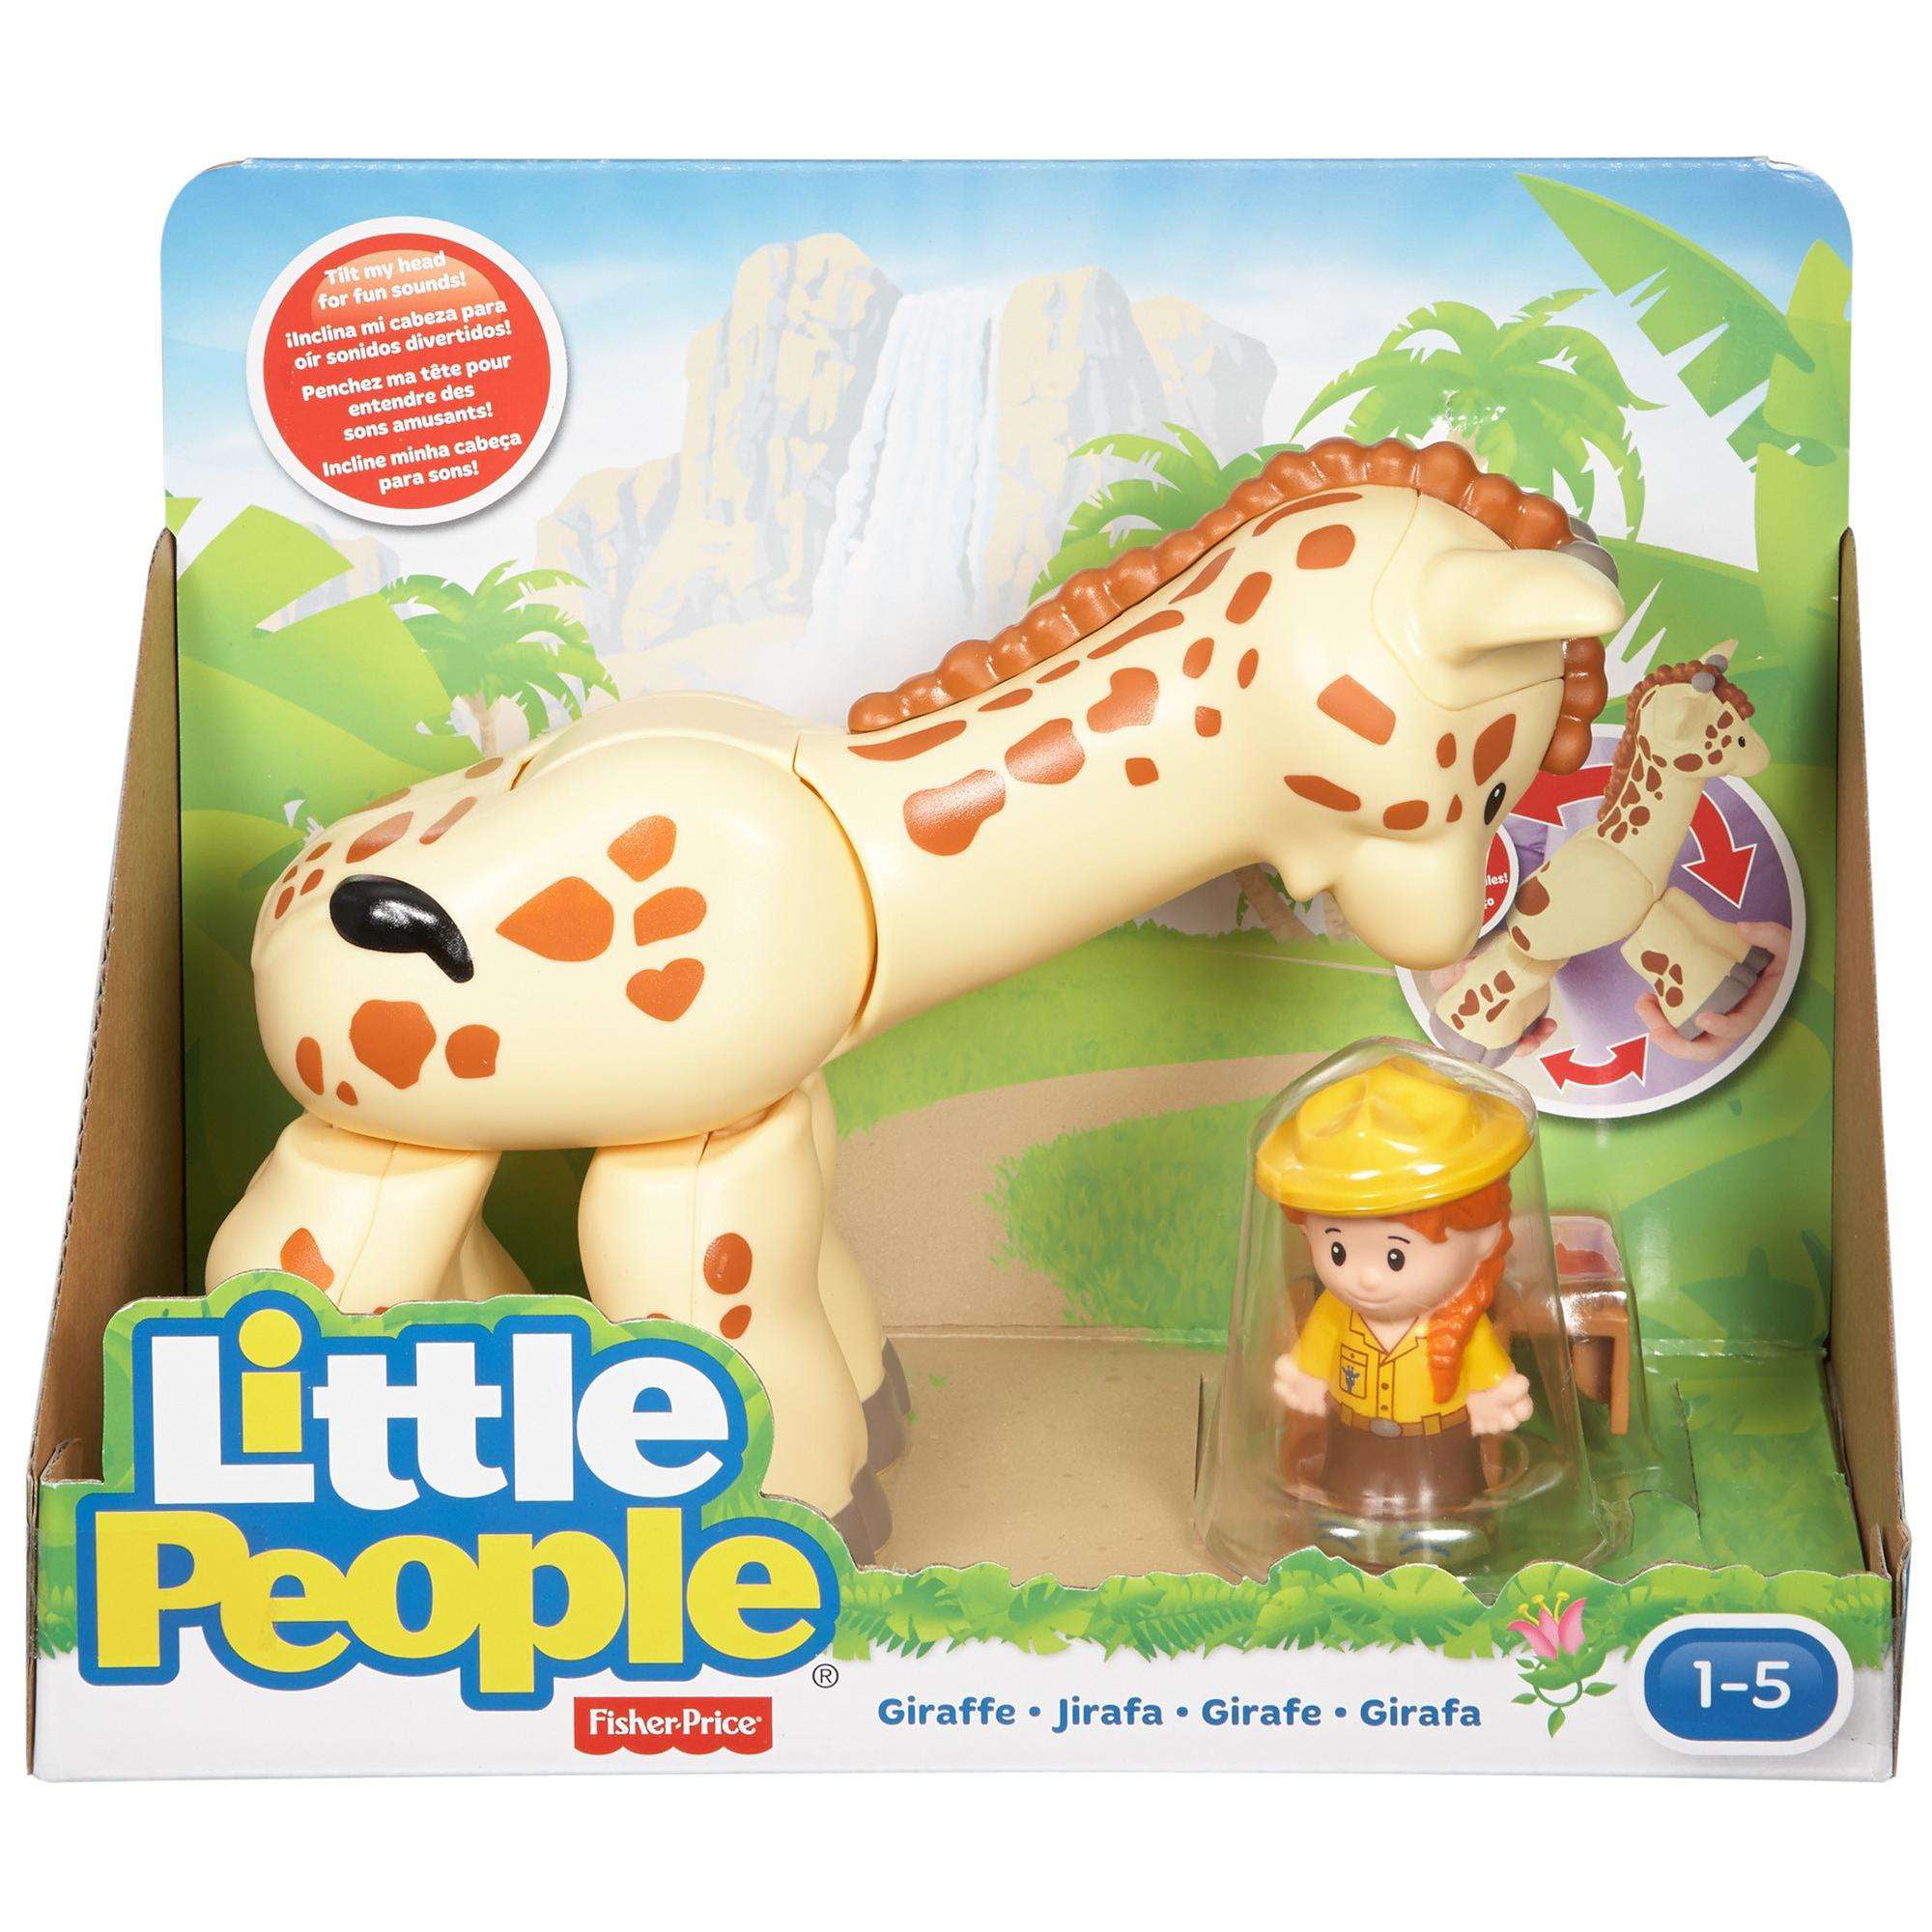 Lot of 2pcs Fisher Price Little People Forest Animals Tan Moose & Giraffe 